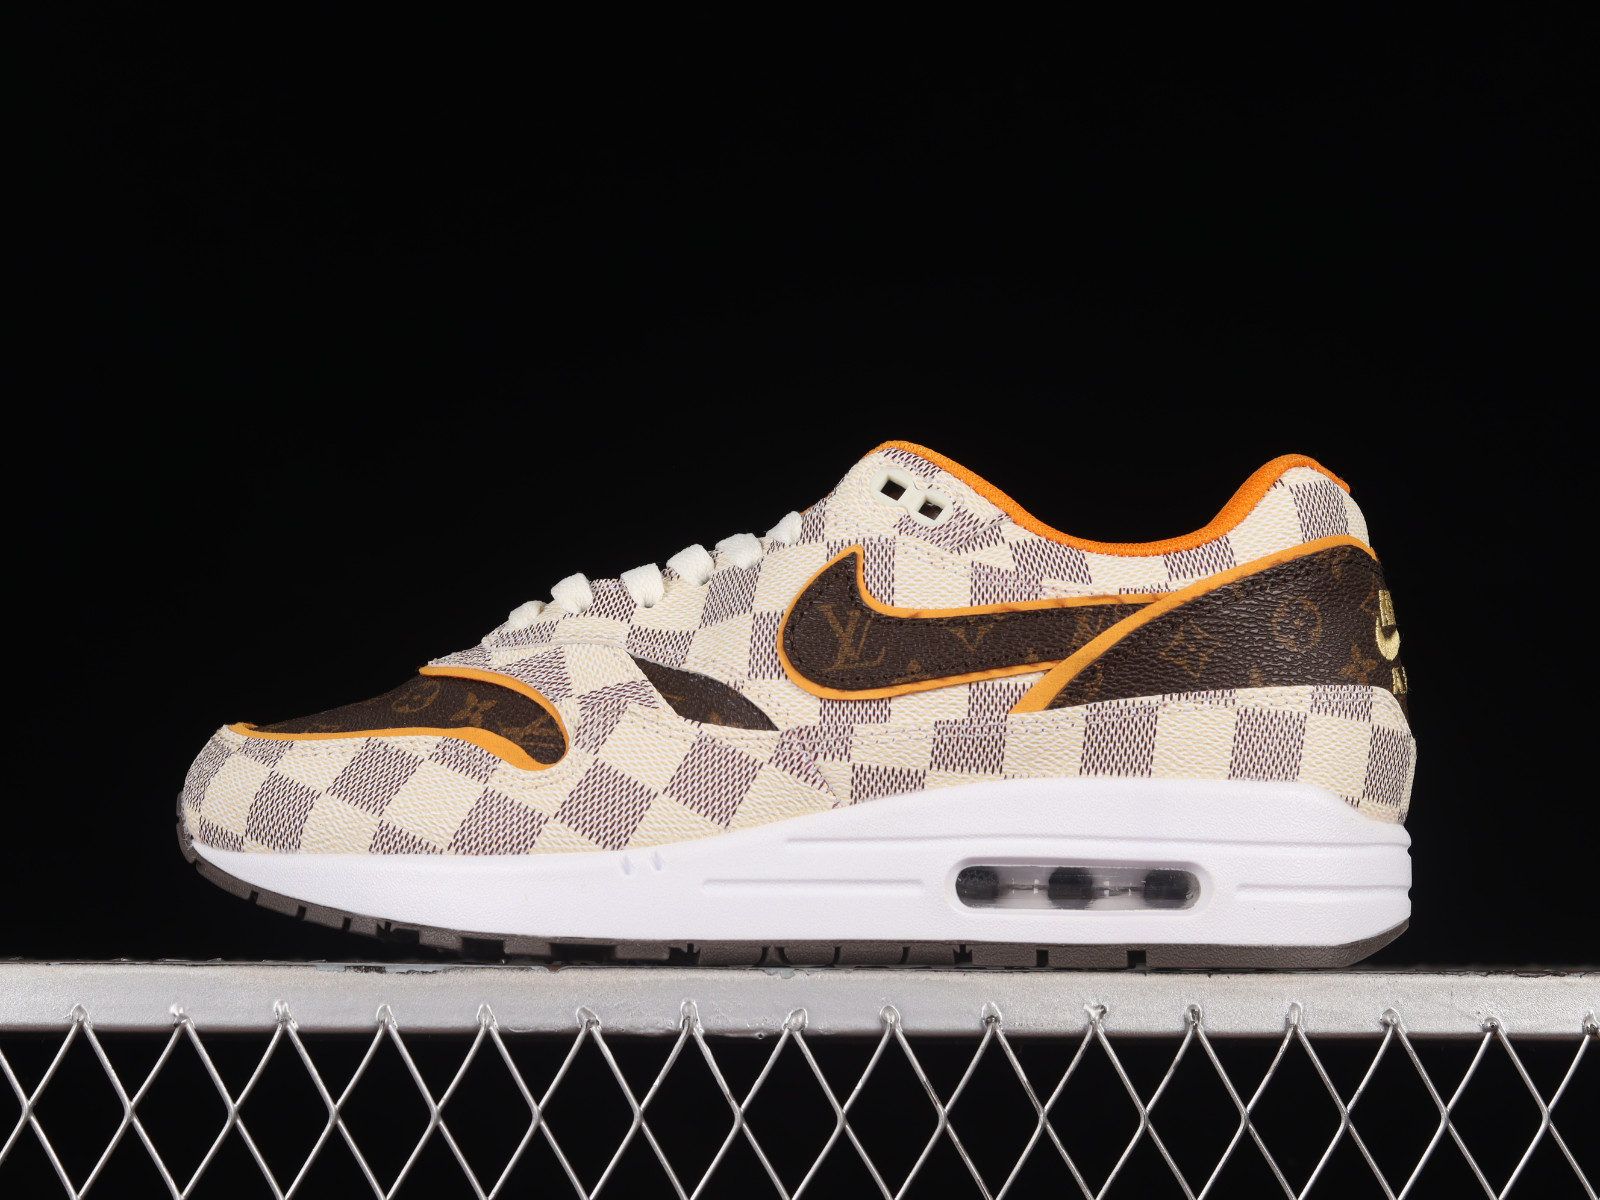 trainer blaas gat corruptie 556 - Nike Air Max 1 LV Brown Orange Gold White DA8301 - womens nike free  cross trainers shoes good for - NwfpsShops